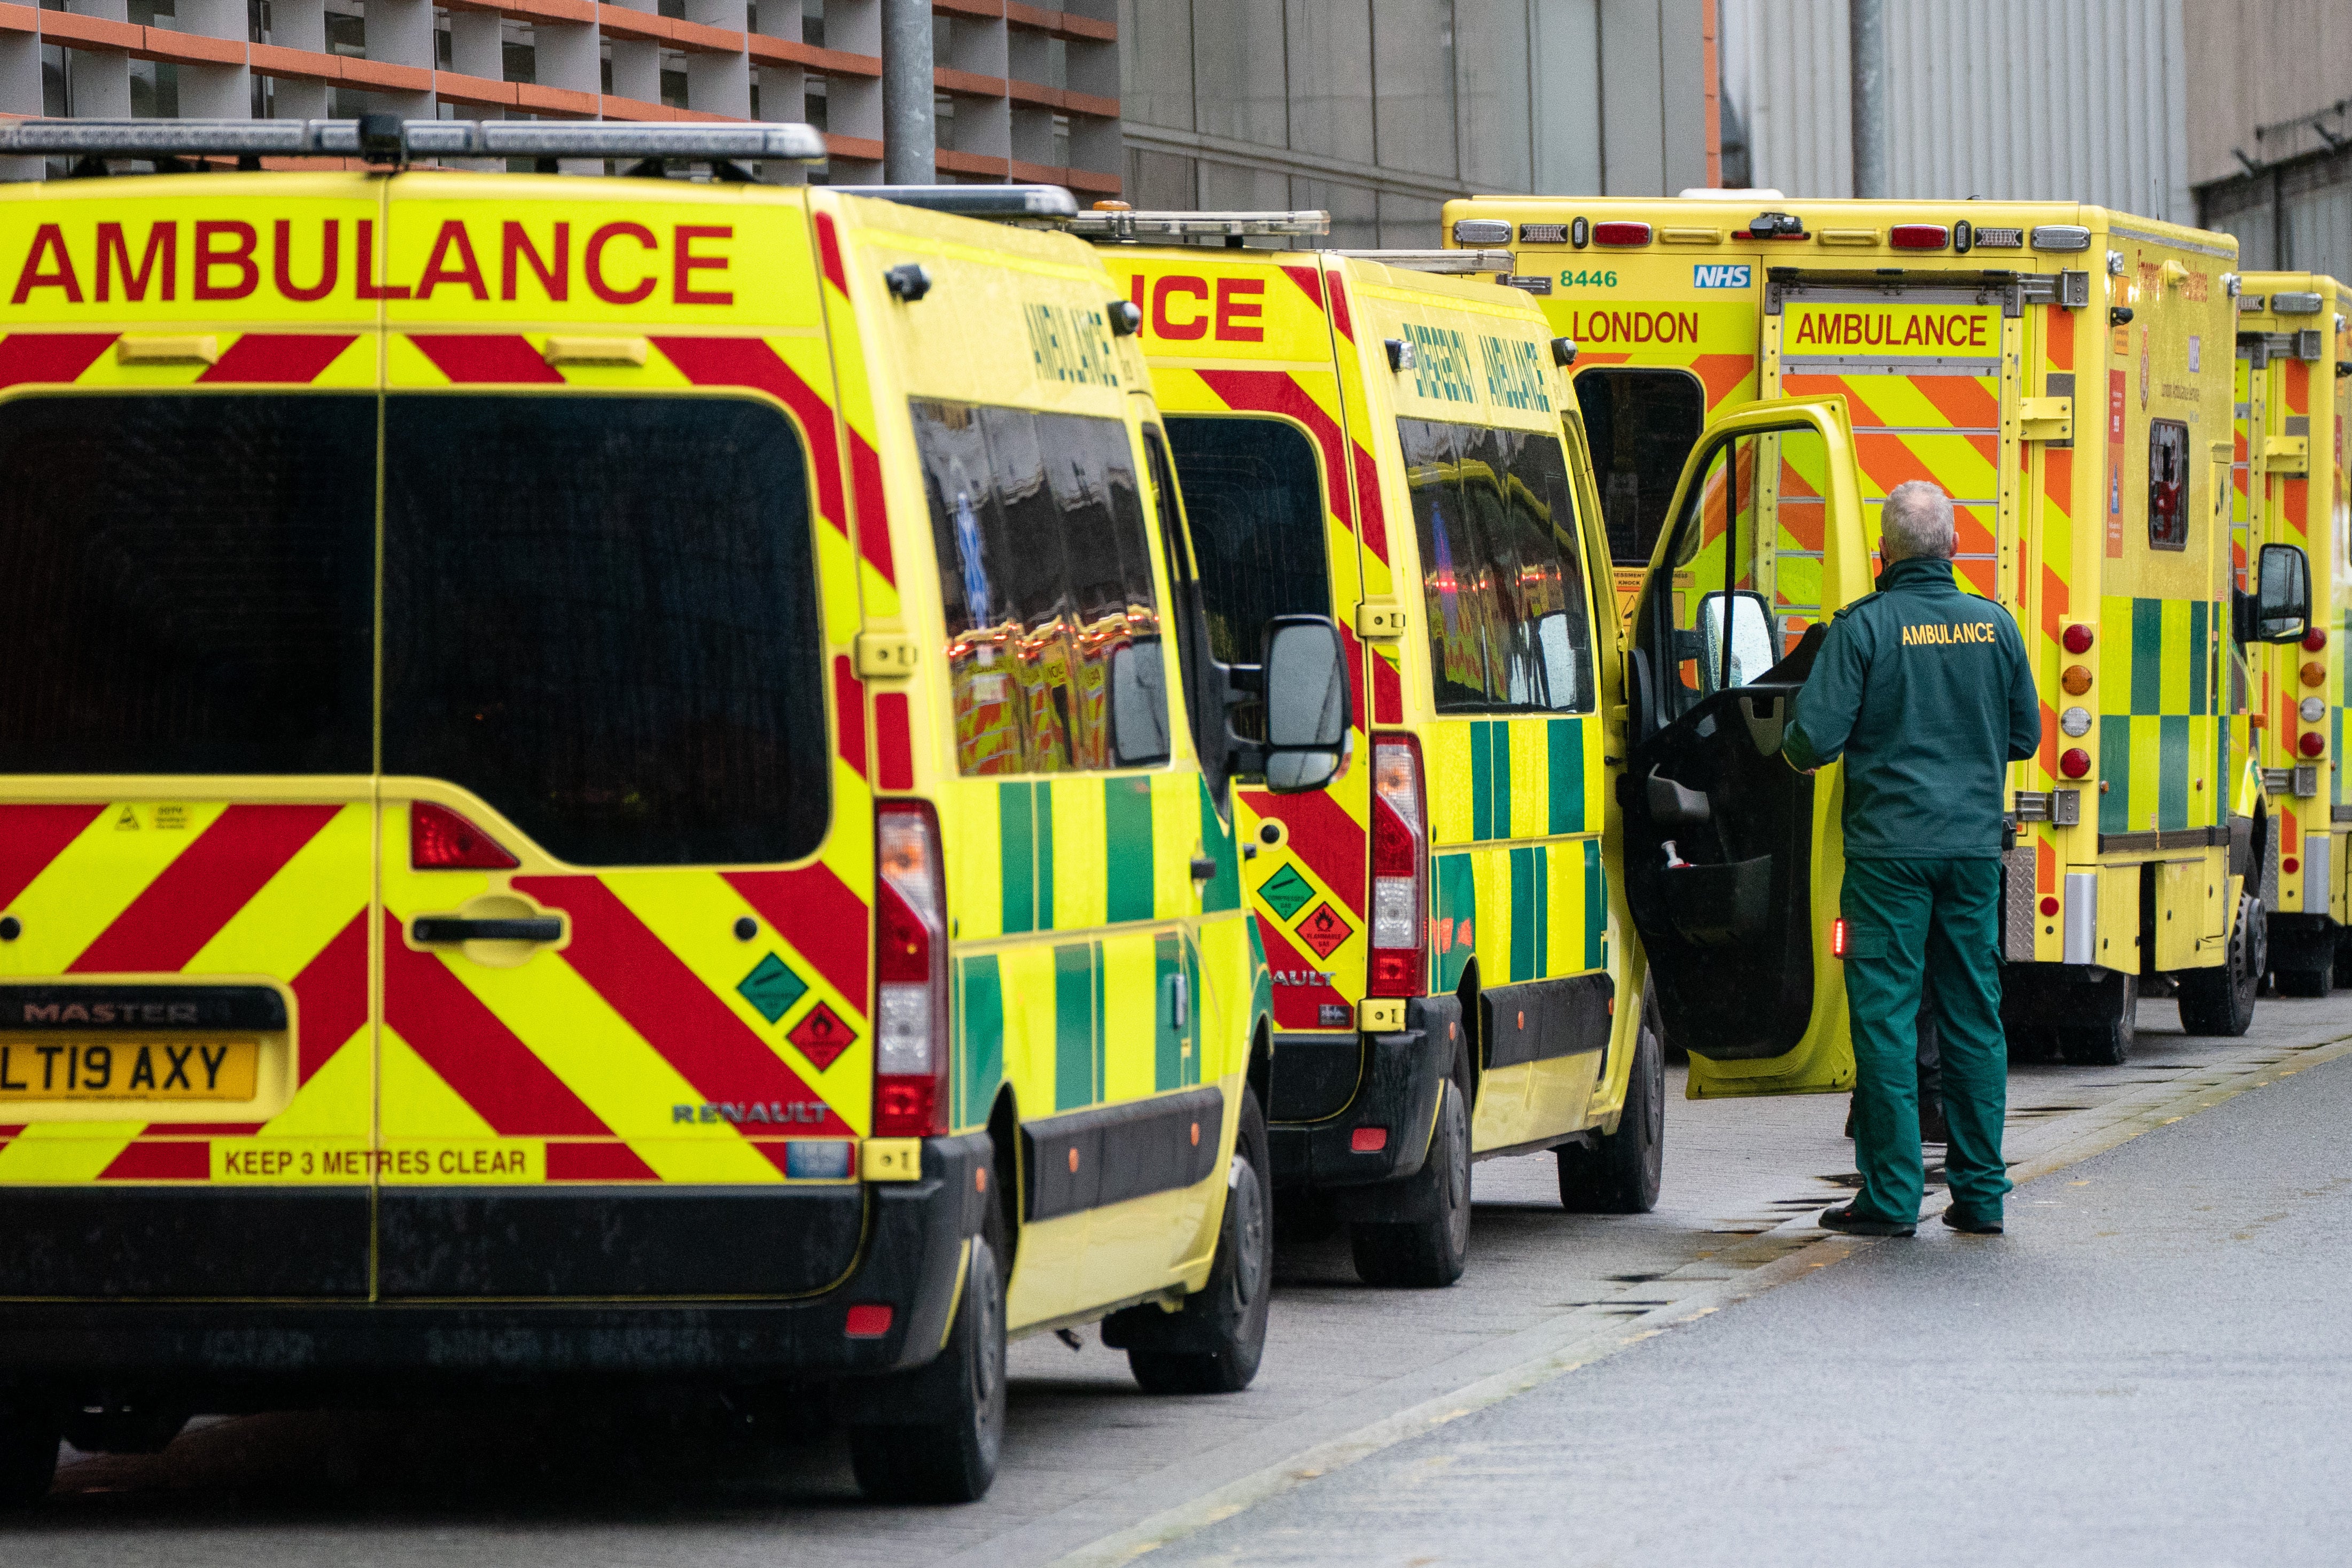 Twenty A&E departments were forced to divert ambulances last week according to NHS figures